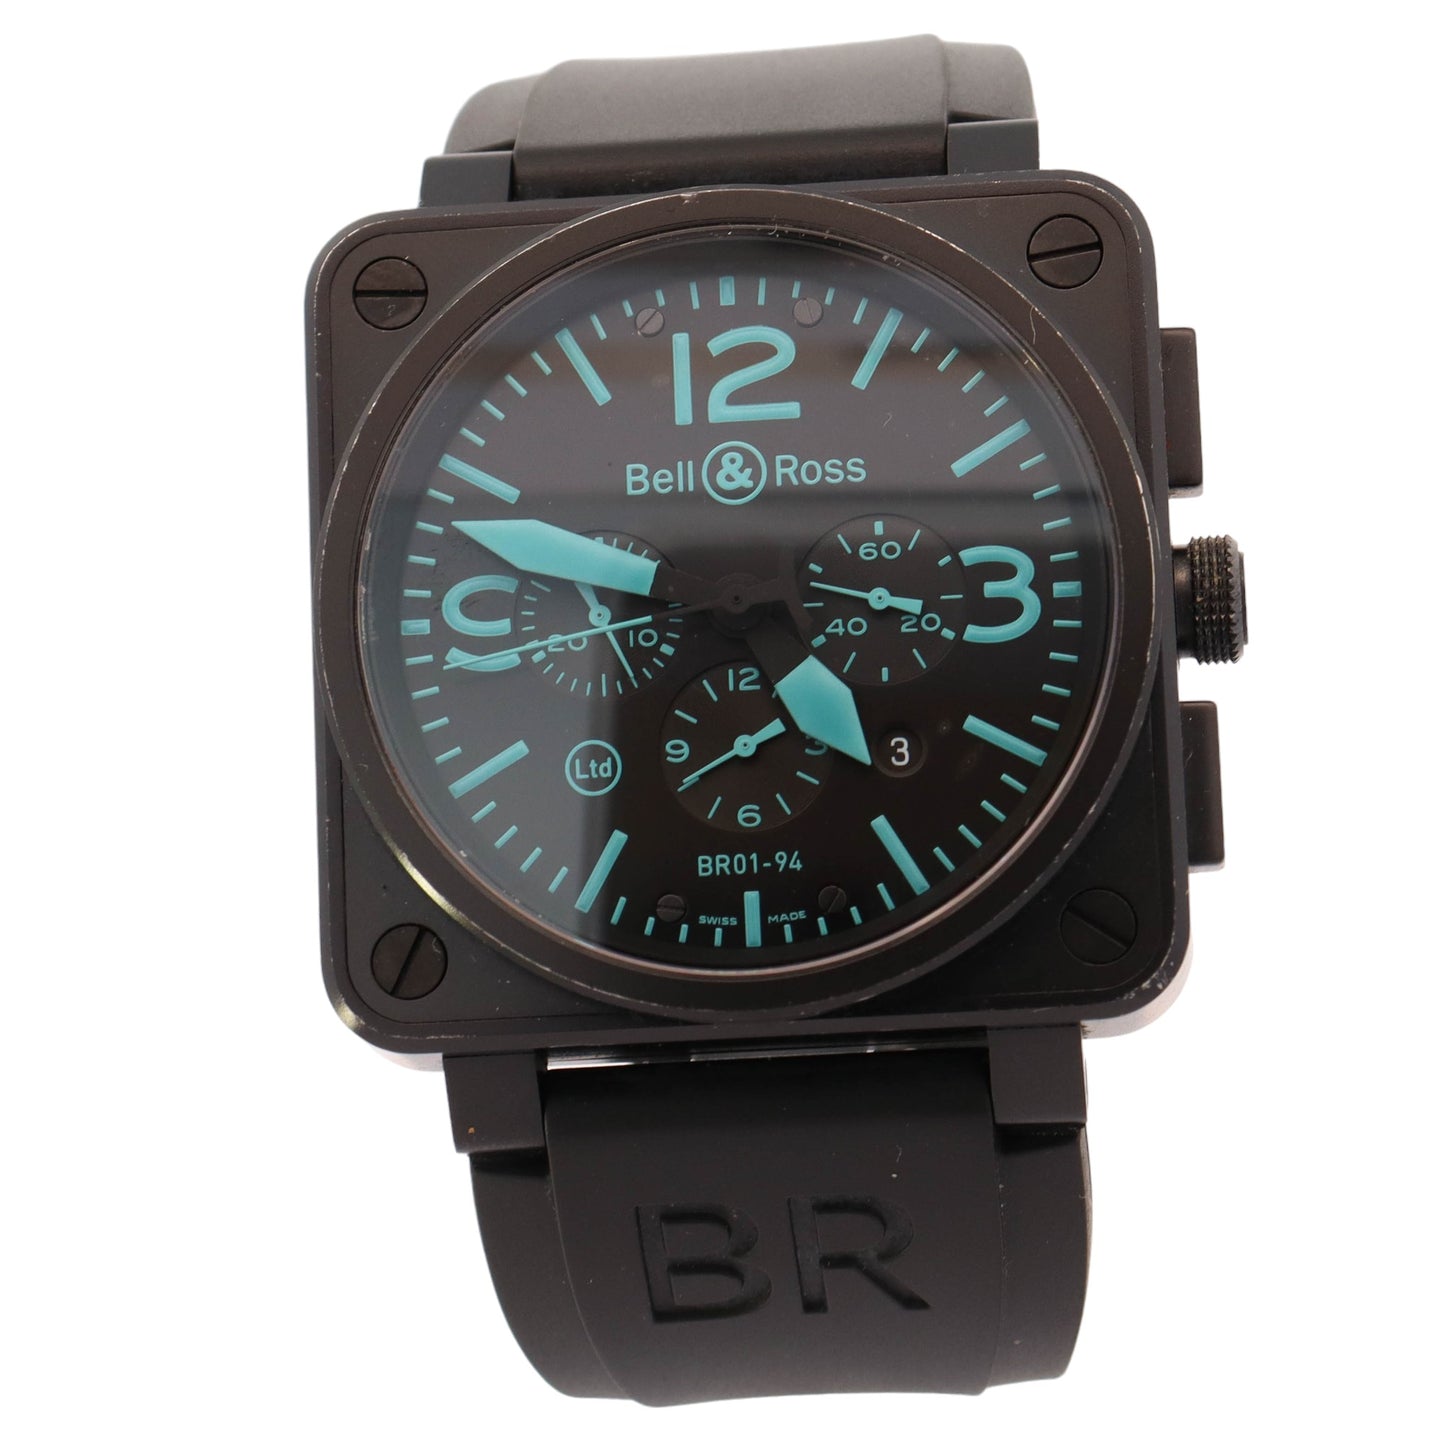 Bell & Ross BR01-94 Stainless Steel 42mm Blue Arabic & Stick Dial Watch Reference #: BR01-94 - Happy Jewelers Fine Jewelry Lifetime Warranty